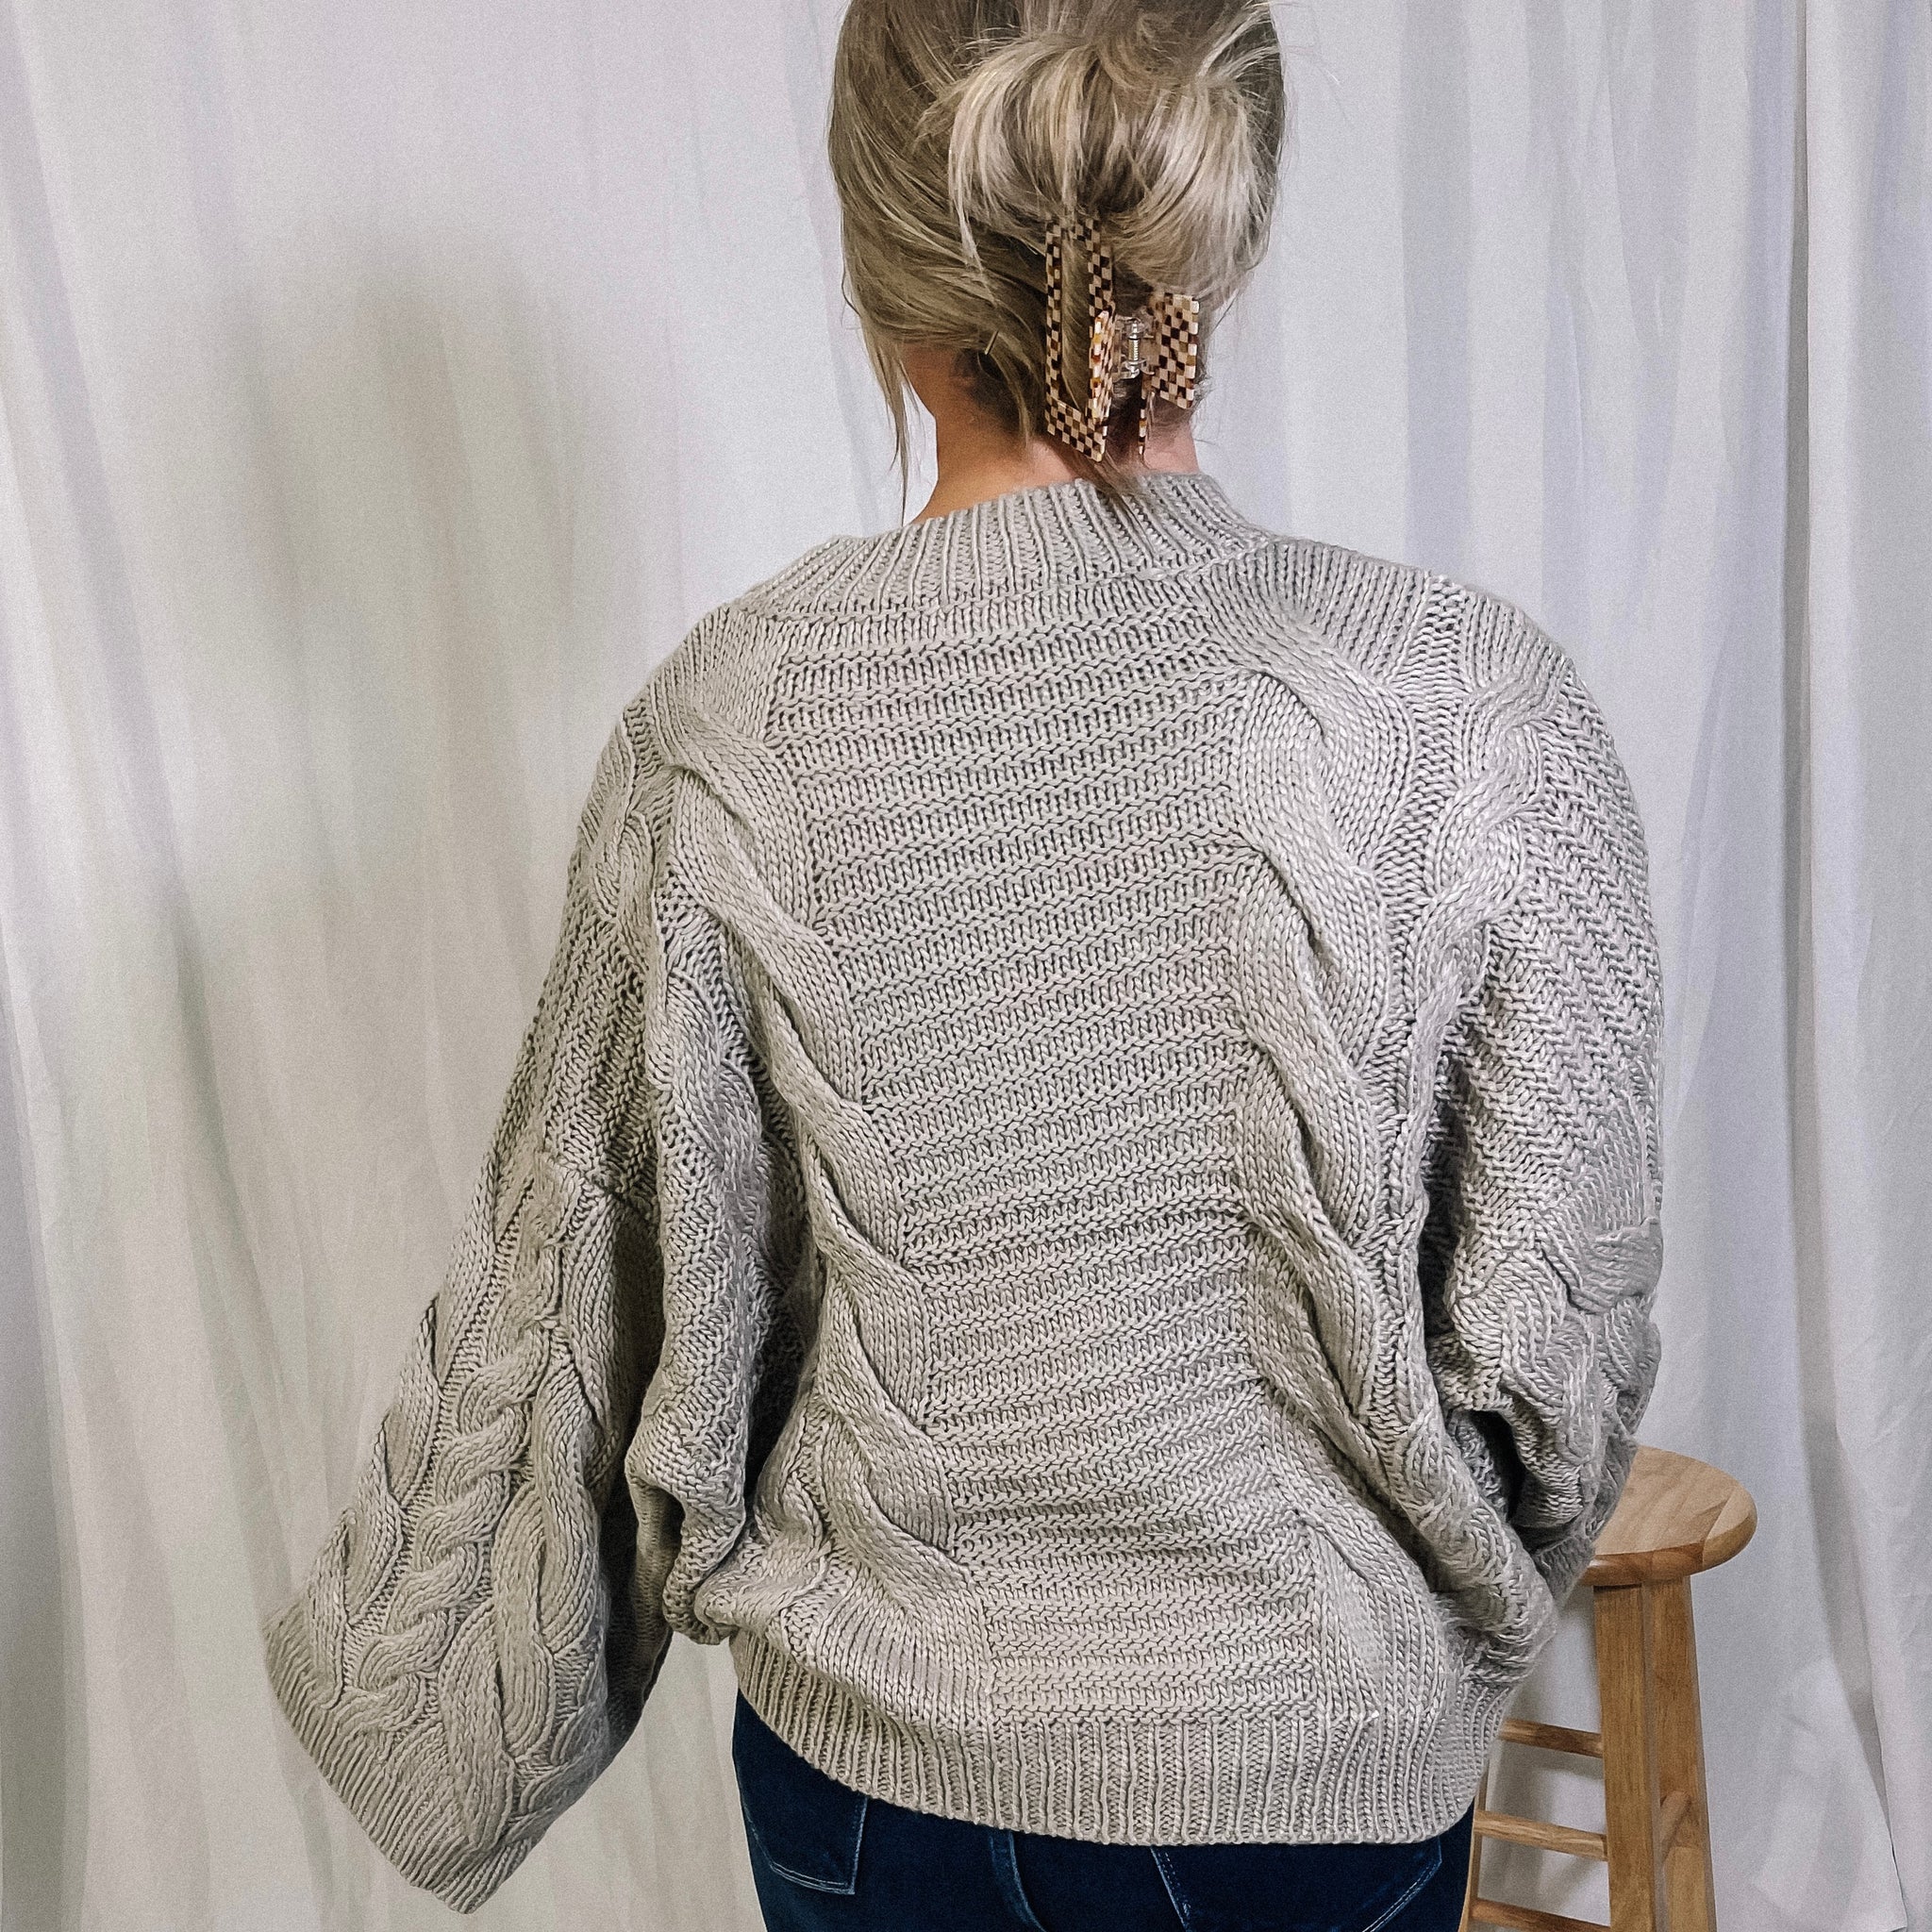 Baby It's Cold Outside Oversized Sweater - Light Grey - LAST ONE